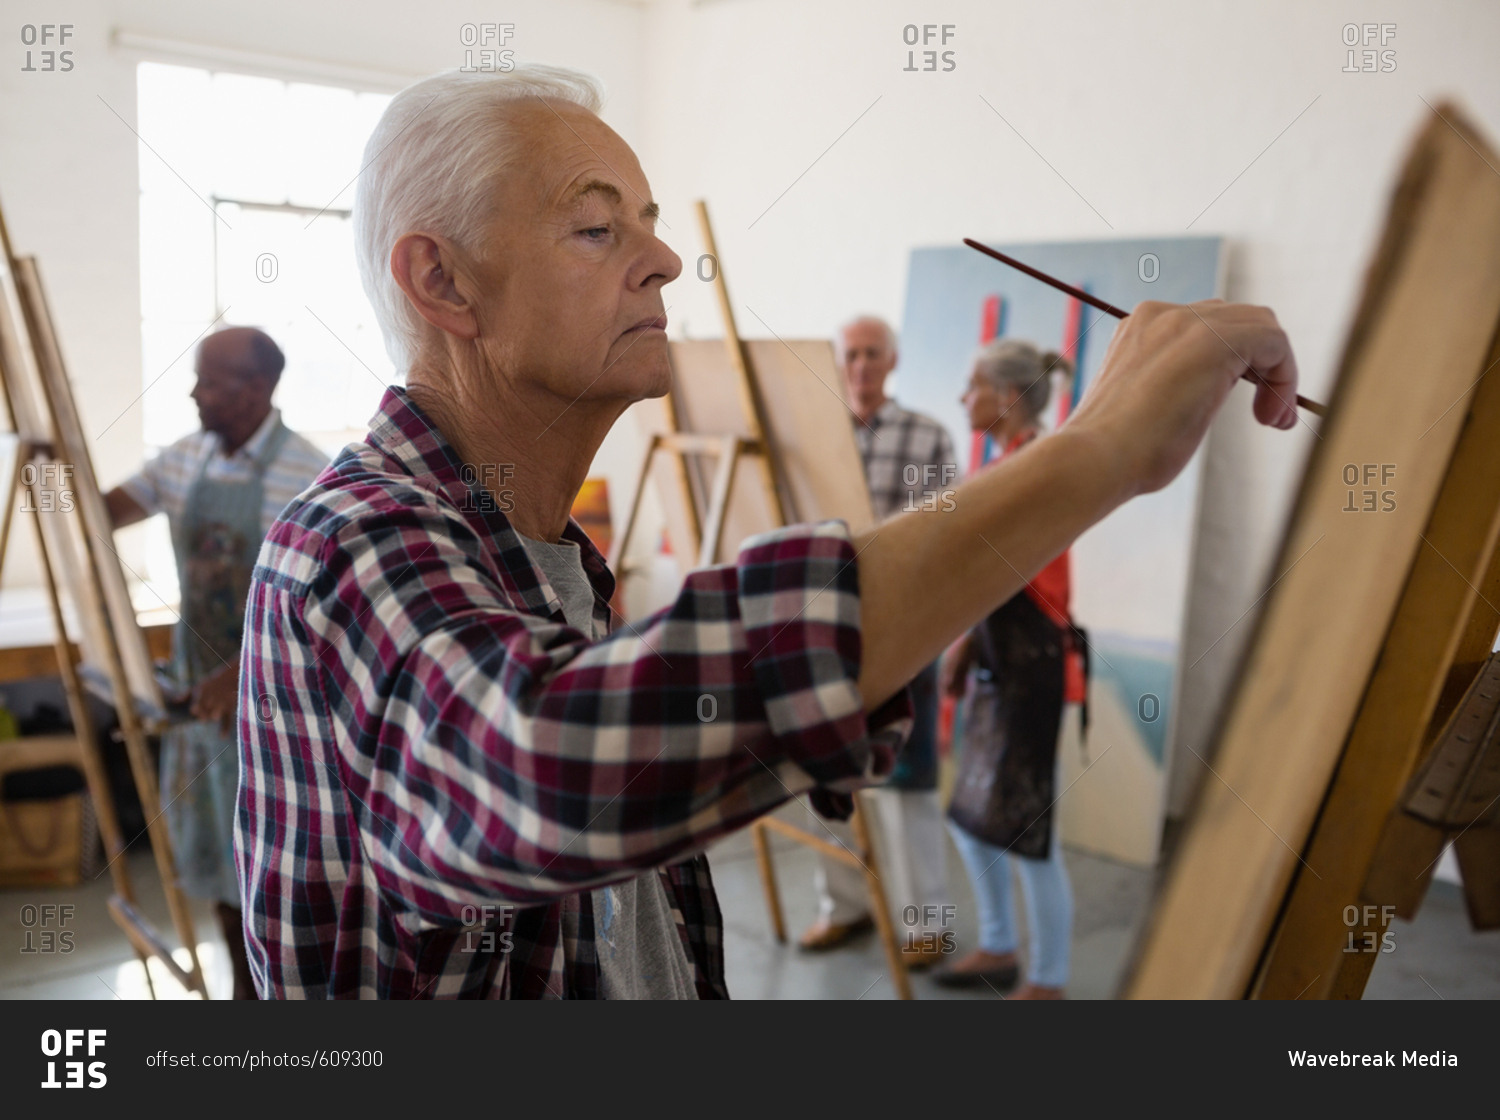 Side view of senior man painting with friends in background at art class